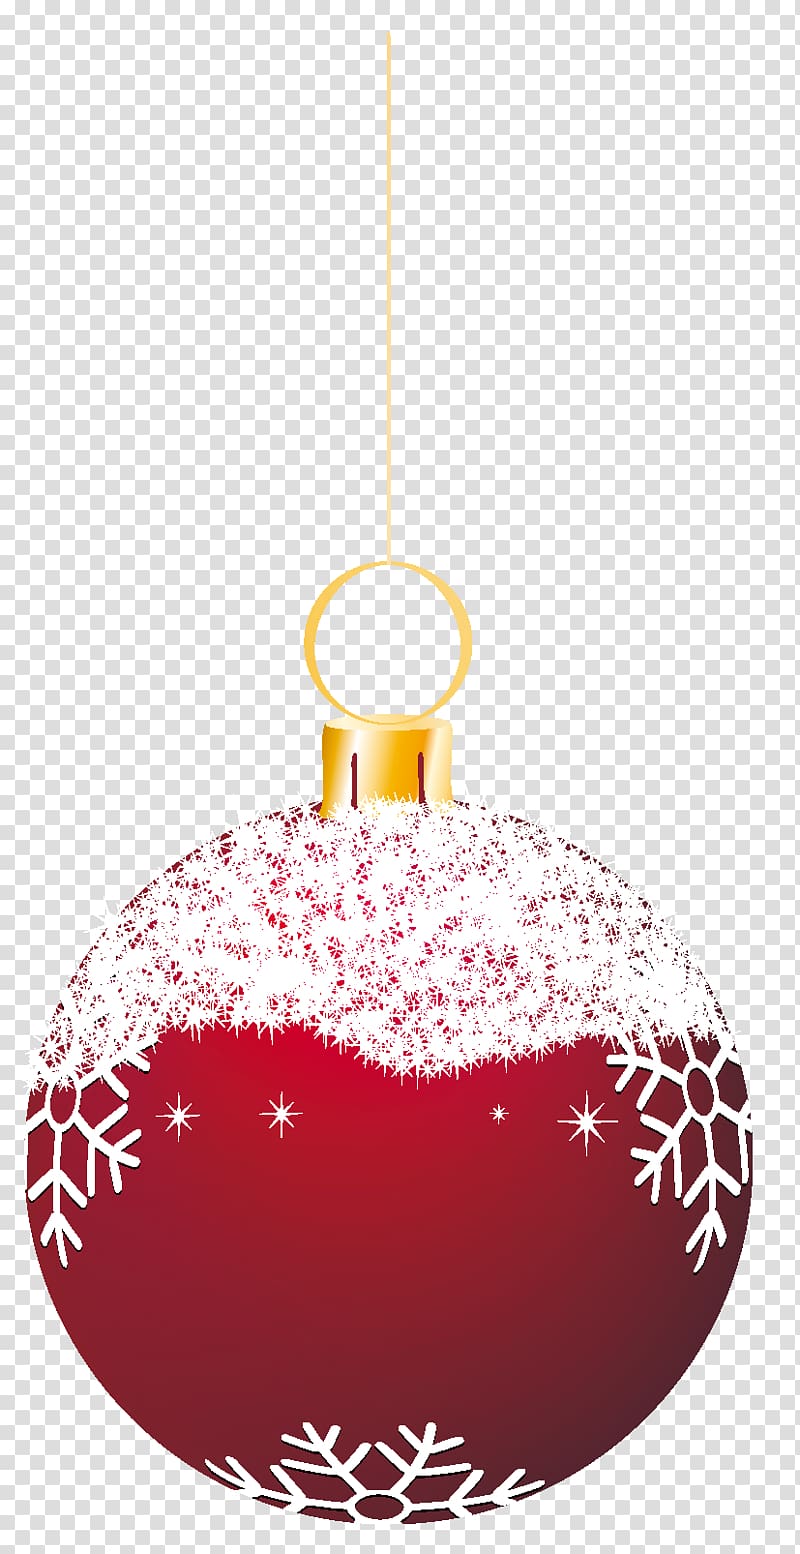 red and white snowflakes bauble , Christmas ornament Christmas decoration Santa Claus , Red Snowy Christmas Ball Ornament transparent background PNG clipart